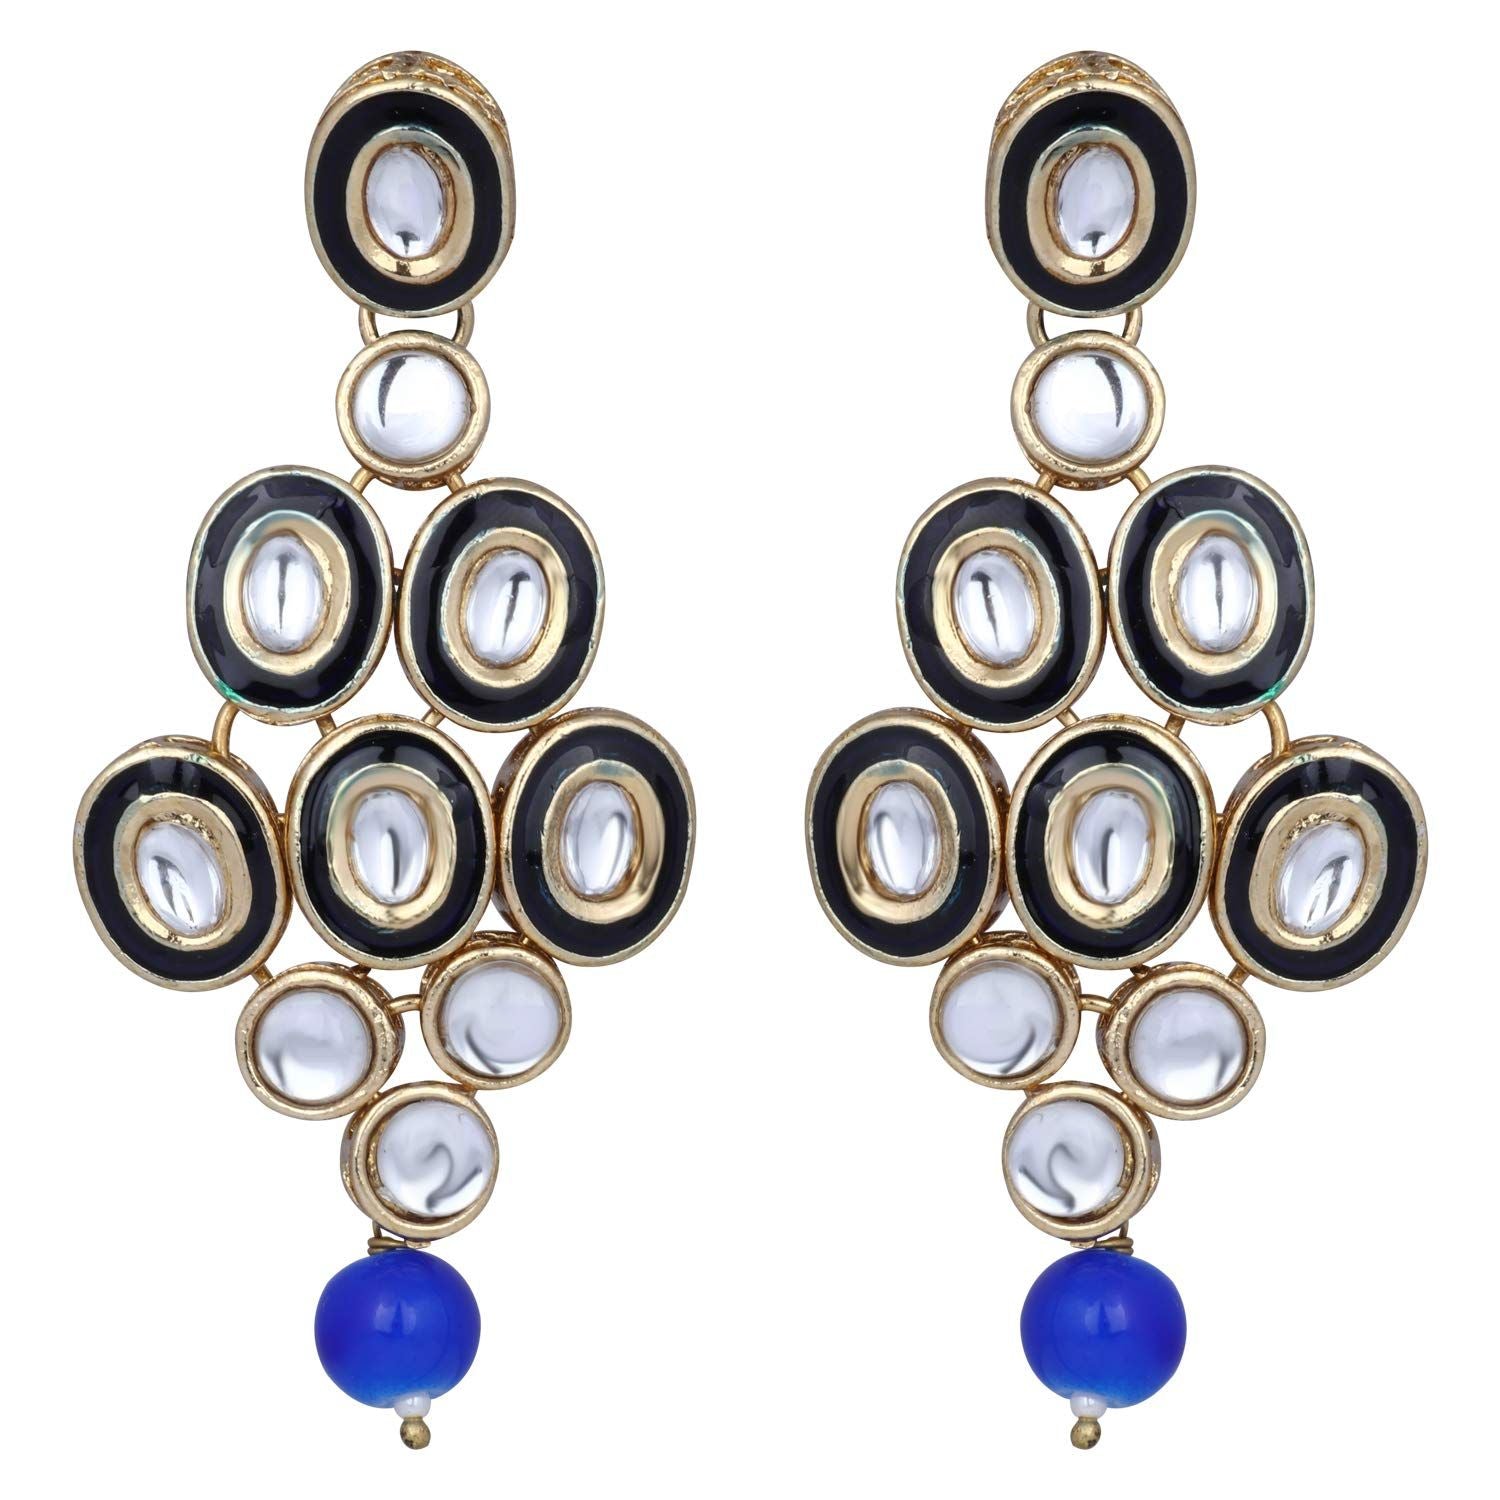 Women's 18K Gold Plated Traditional Stunning Blue Meenakari Kundan Studded Pearl Necklace Jewellery Set with Earrings  - I Jewels